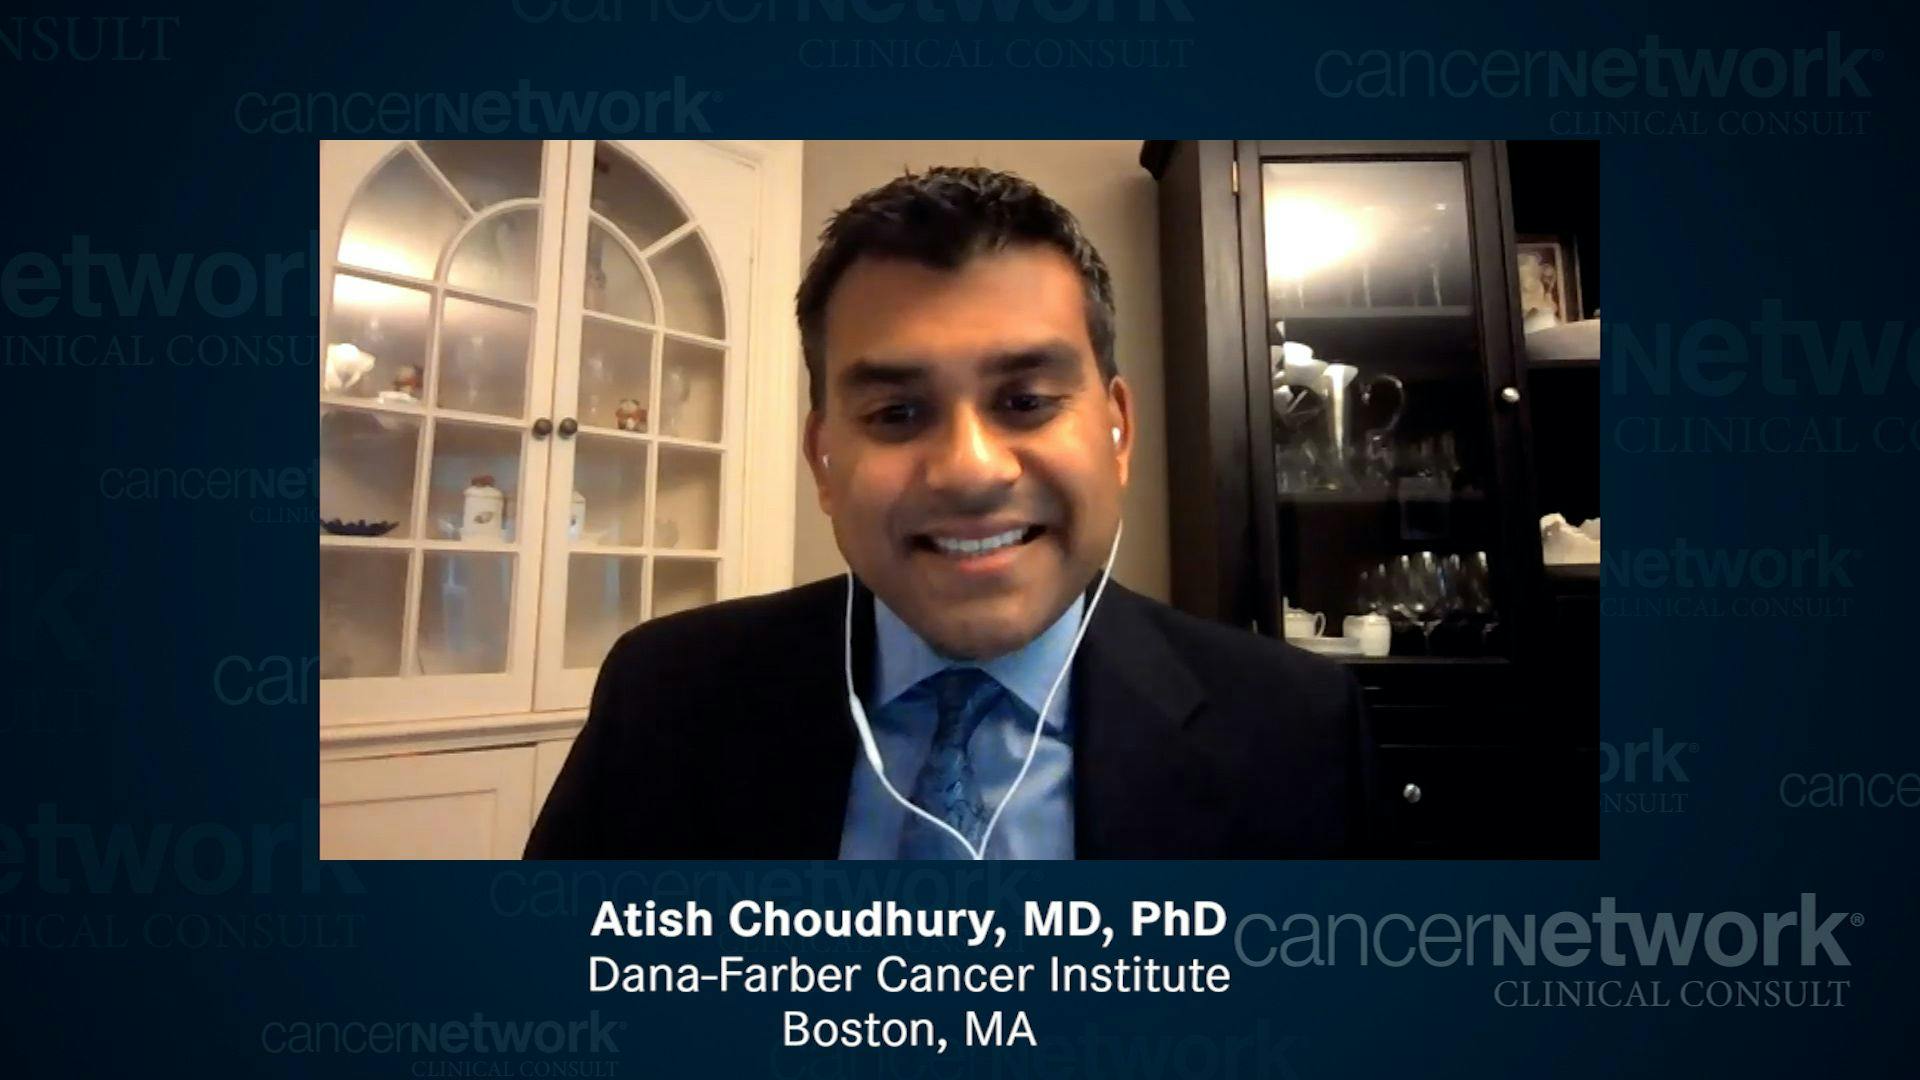 Recent Updates in Prostate Cancer Care